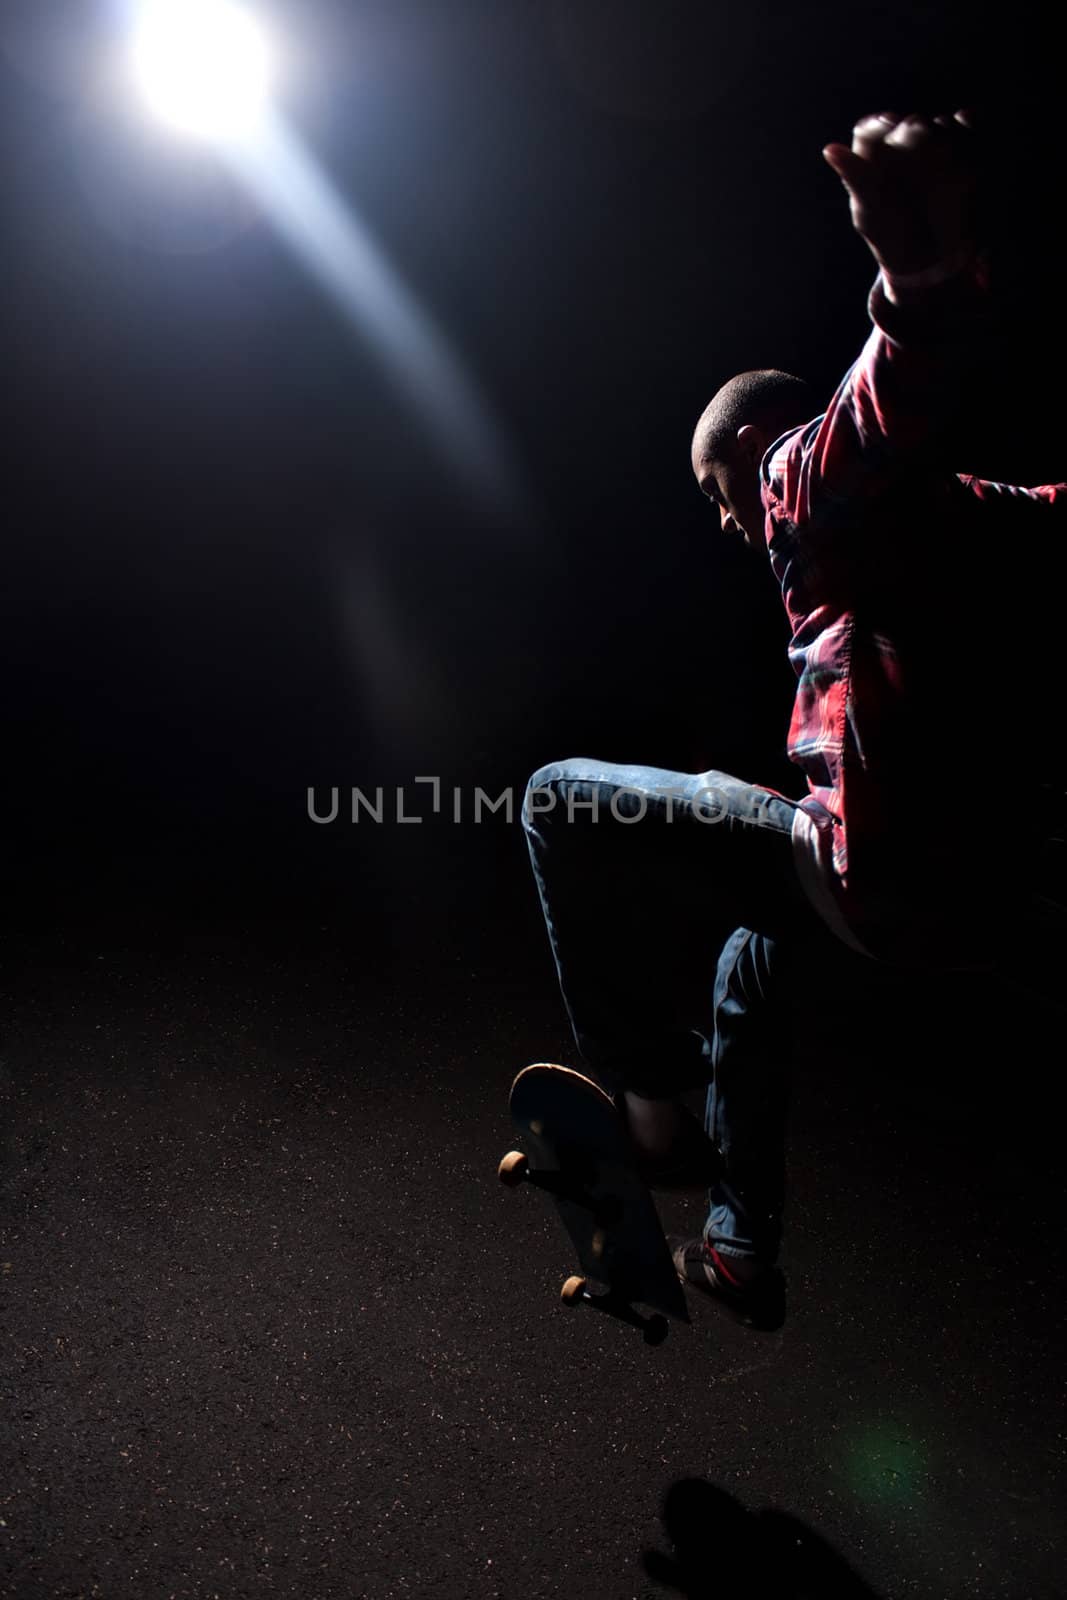 Skateboarder Jumping Under Dramatic Lighting by graficallyminded